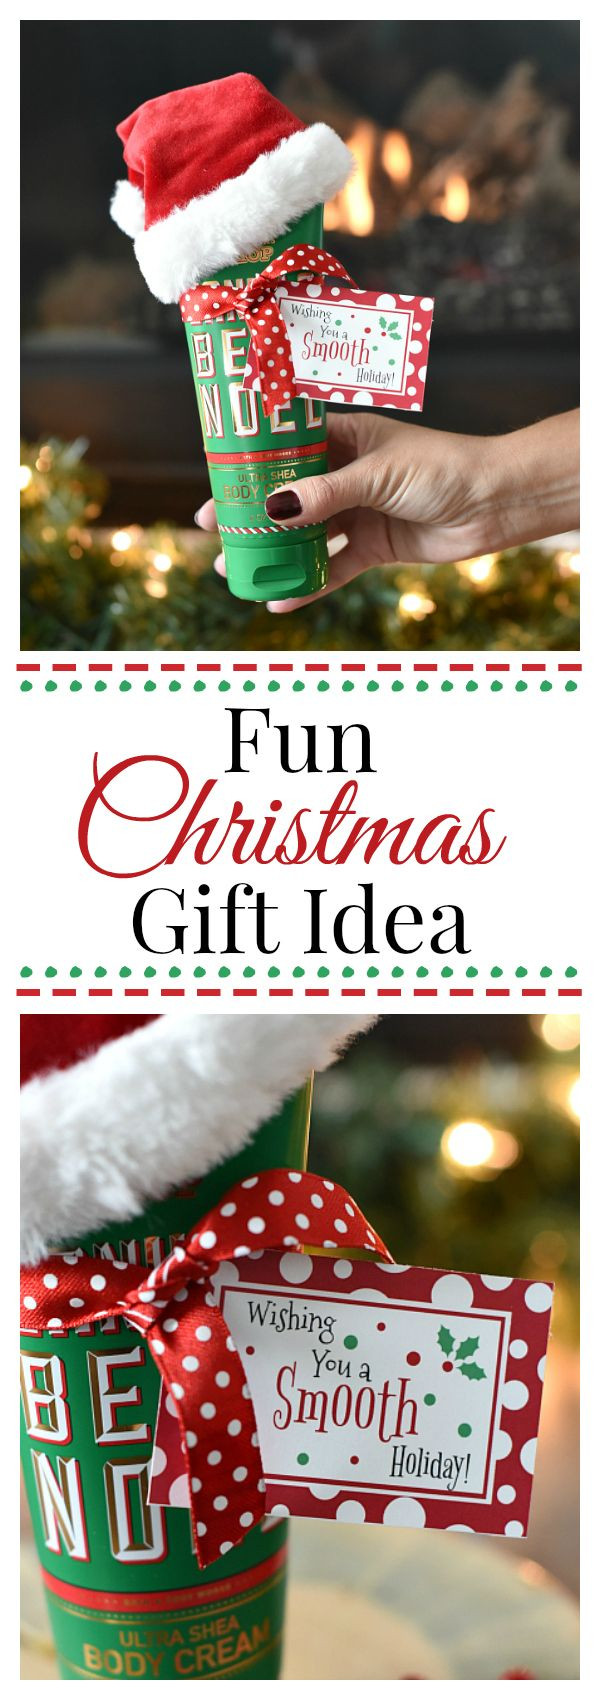 Office Holiday Gift Ideas
 25 unique fice christmas ts ideas on Pinterest